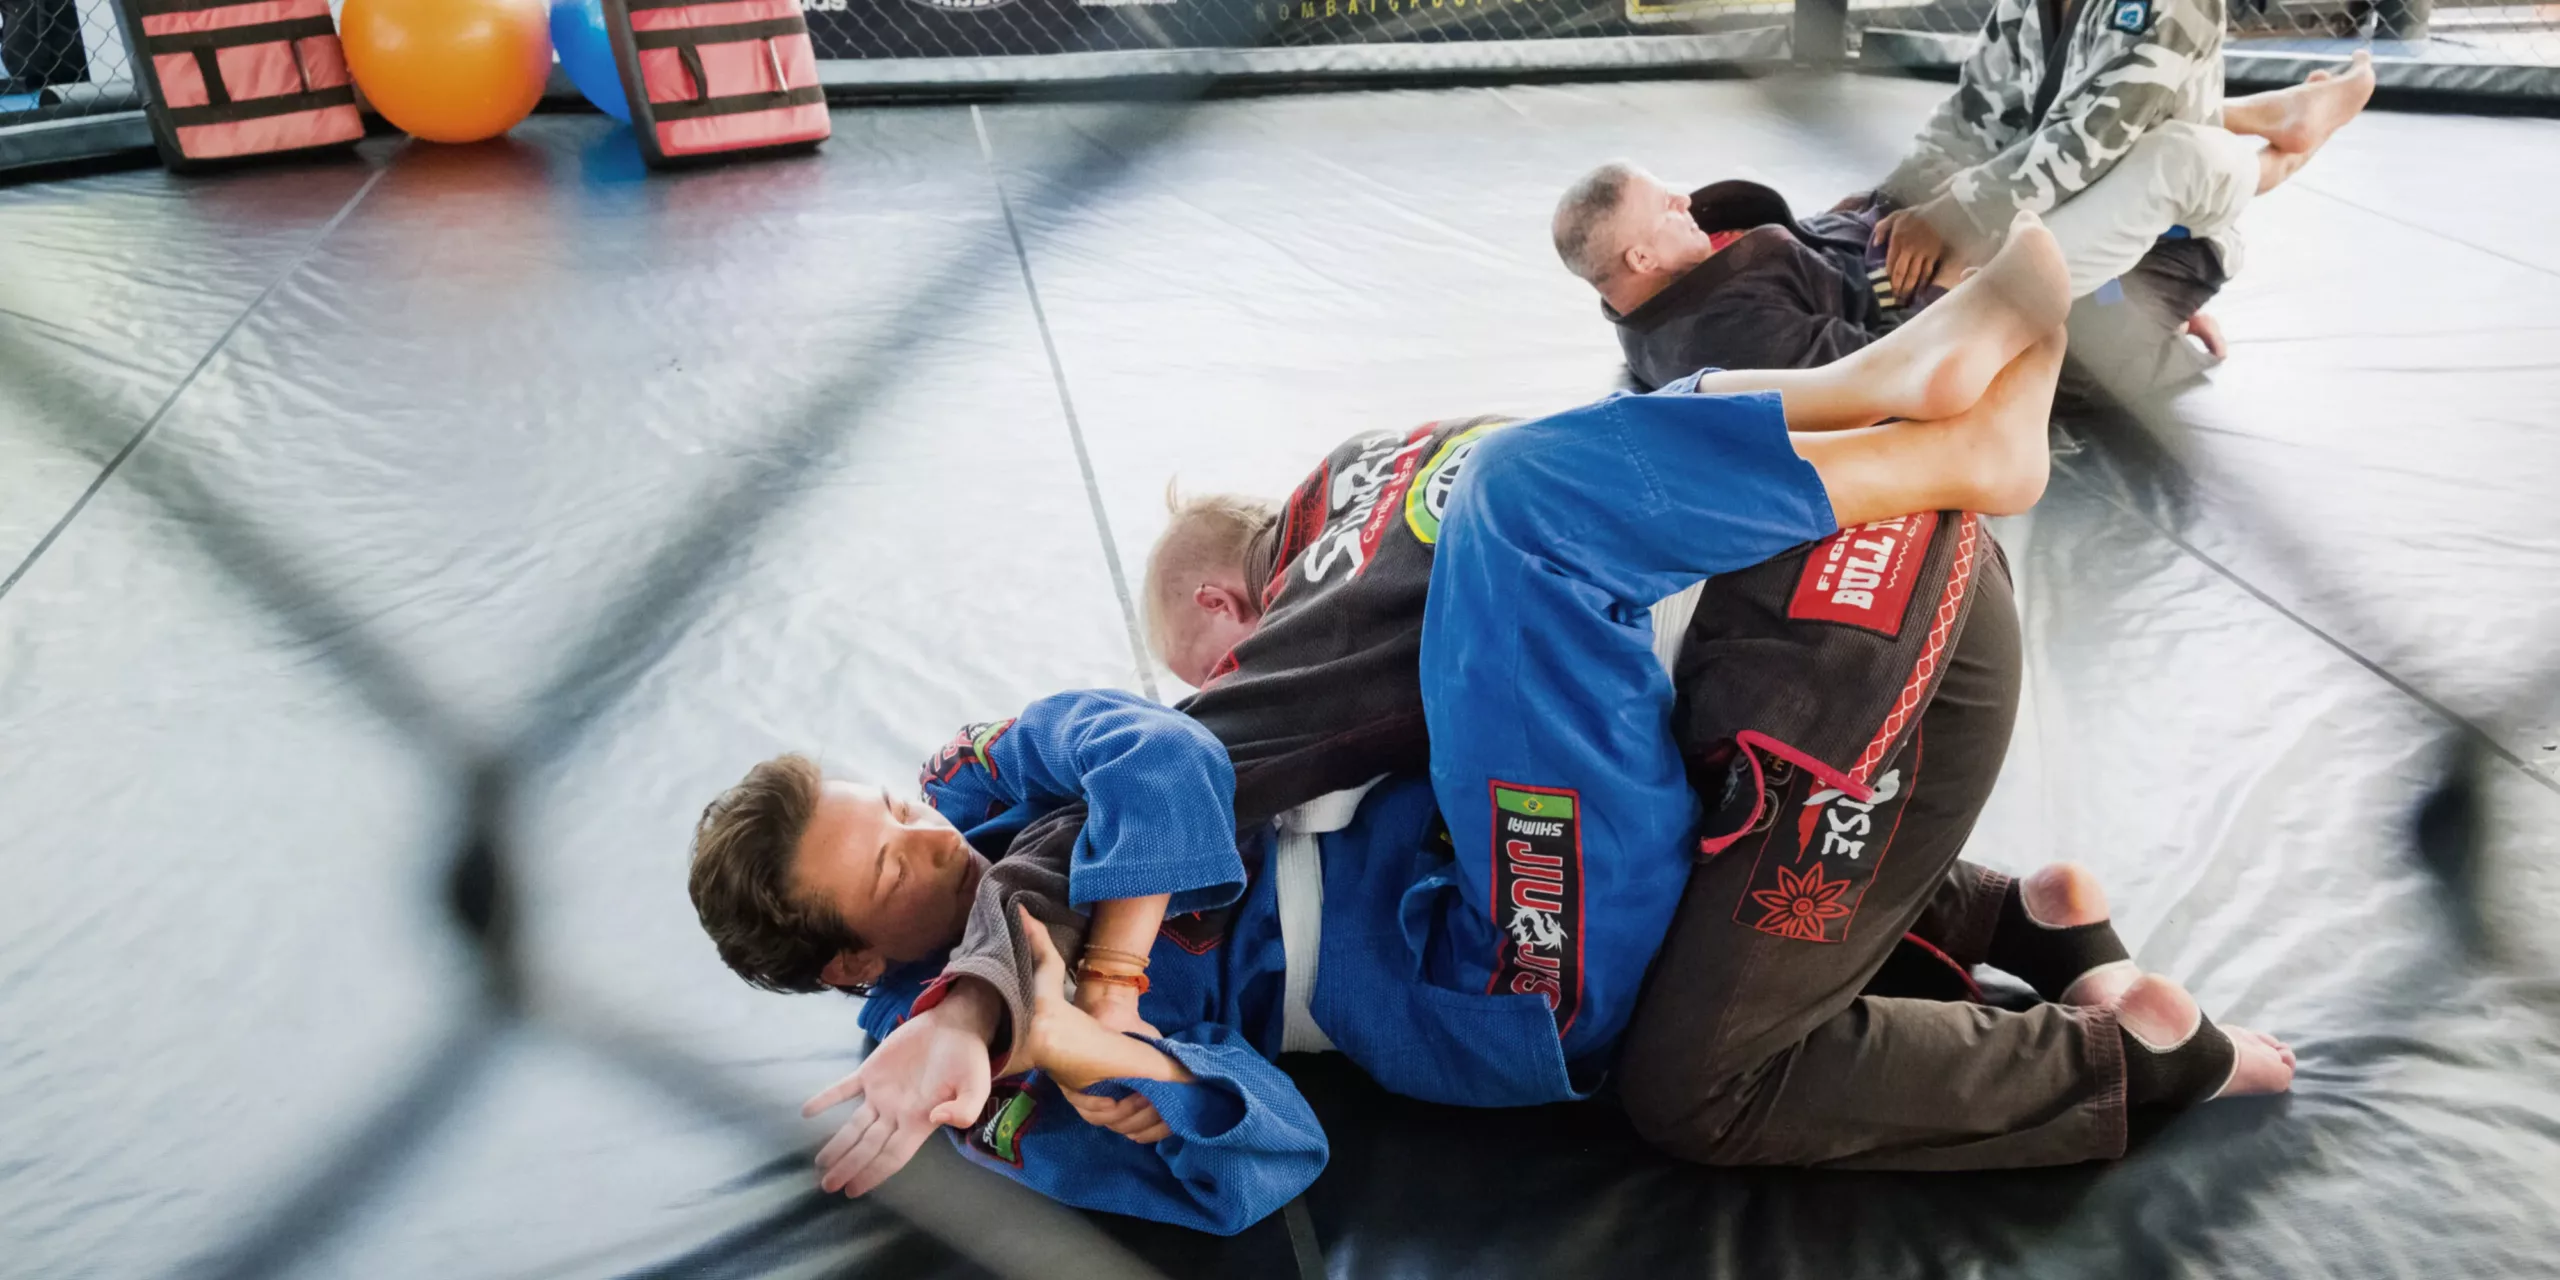 Brazilian Jiu-Jitsu students practice on the mat, with one applying a guard technique while their partner works on passing the guard, showing concentration and teamwork in a grappling drill.